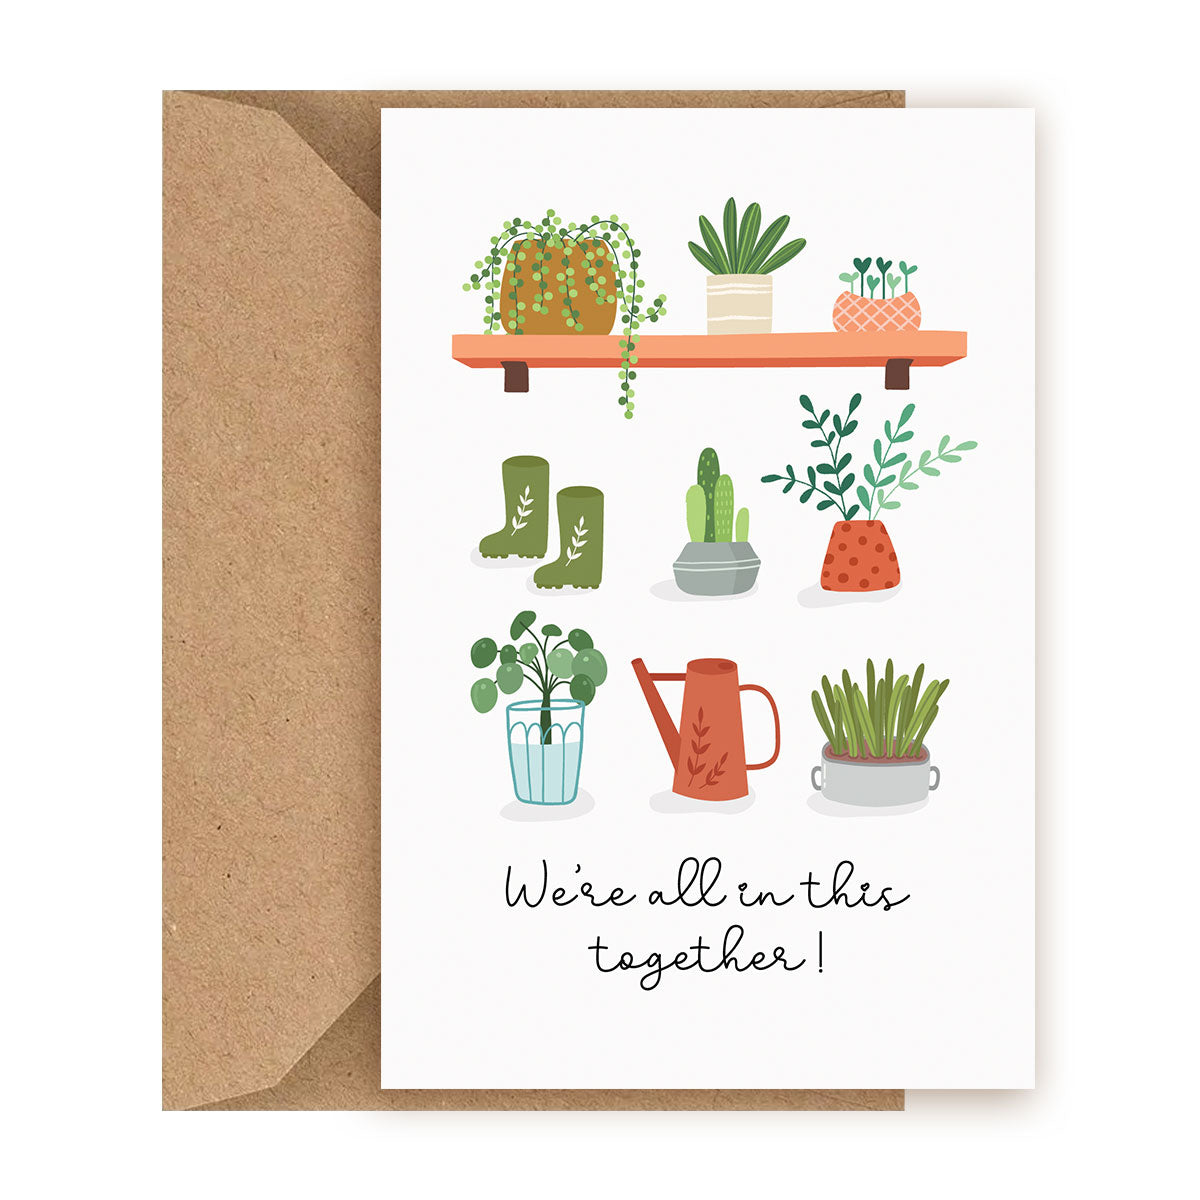 We're All In This Together Card, Succulent Card for sale, Cactus Greeting Card, Succulents Greeting Card, Succulents Gift Ideas, Thank you card for employee, Employee Appreciation Cards for sale, Corporate succulent gift with thank you card, Thank You Live Succulent Gift Box for sale, Succulent thank you cards with kraft envelope, Succulent thank you cards to suit any occasion, Staff Appreciation Card ideas, Thank you note to employee for a job well done, Thank you card for employee appreciation